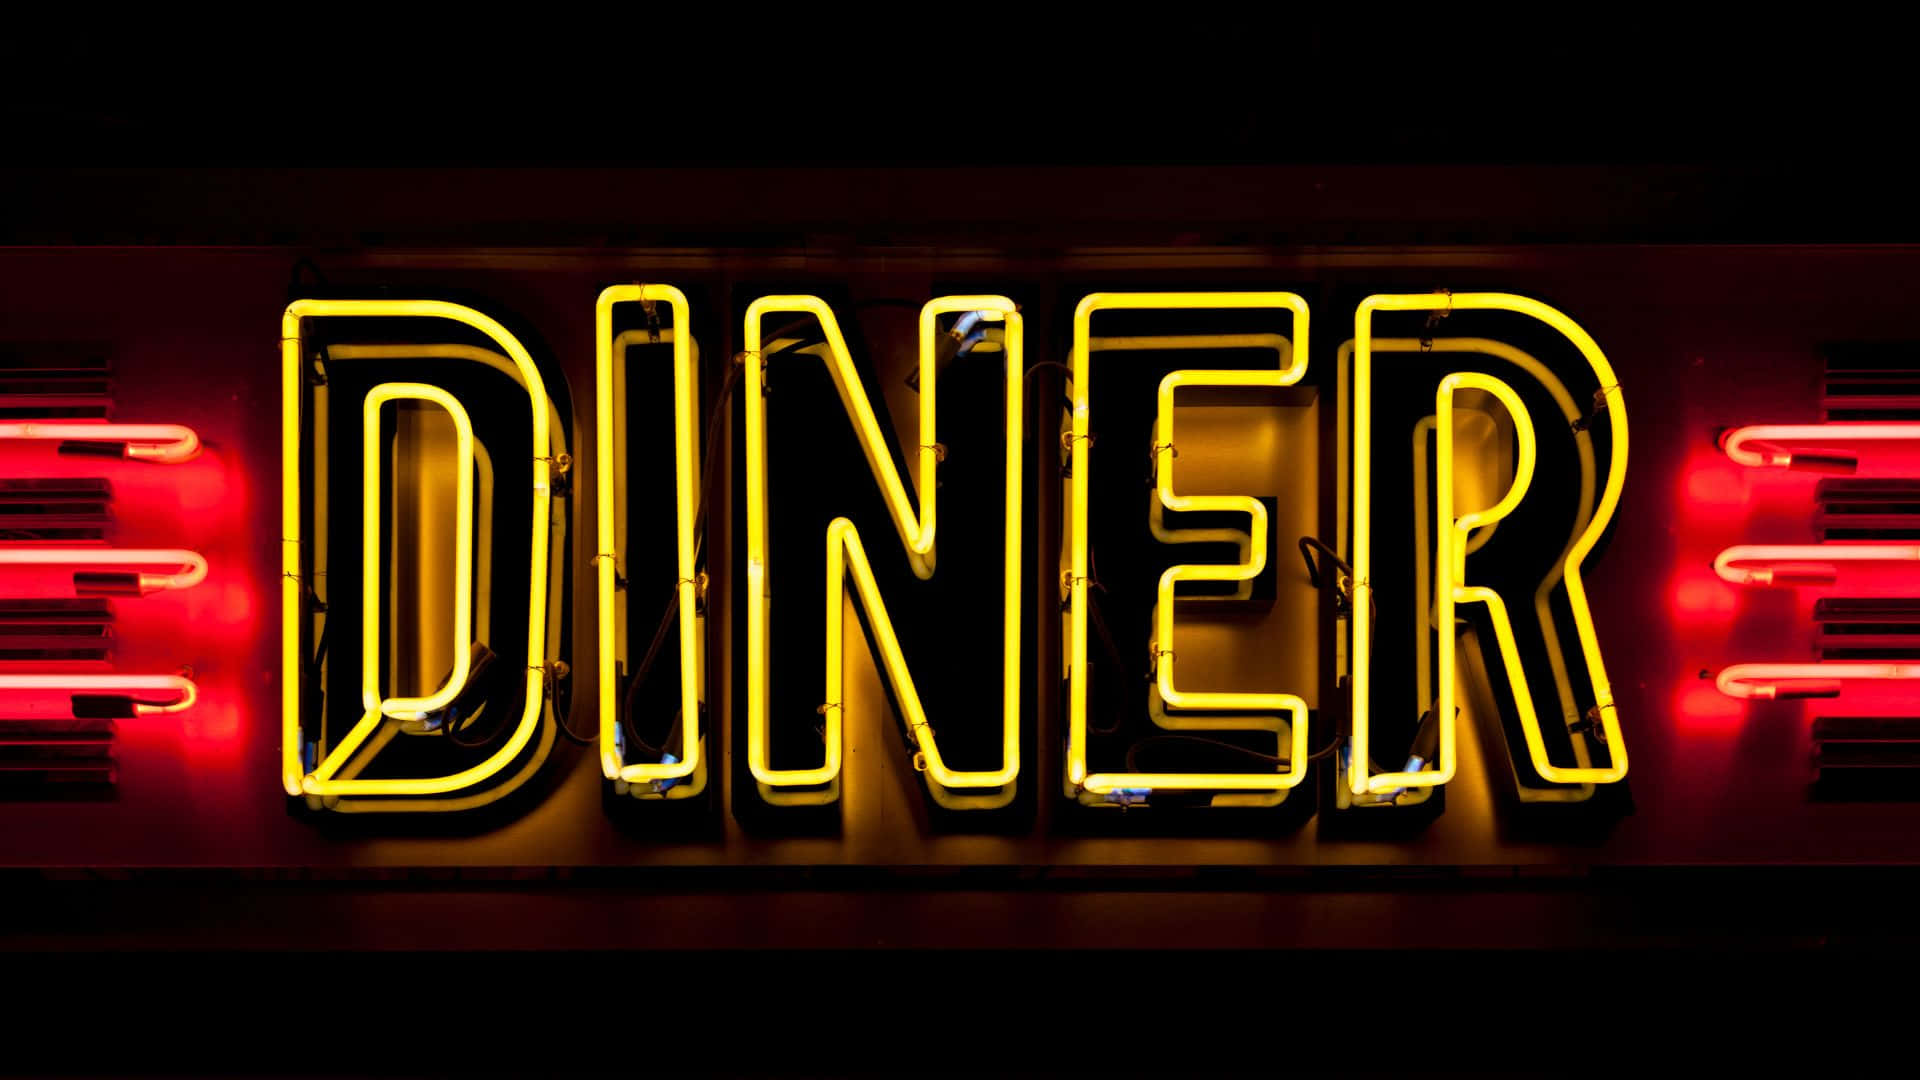 Retro Diner Interior with Red Booths and Neon Lights